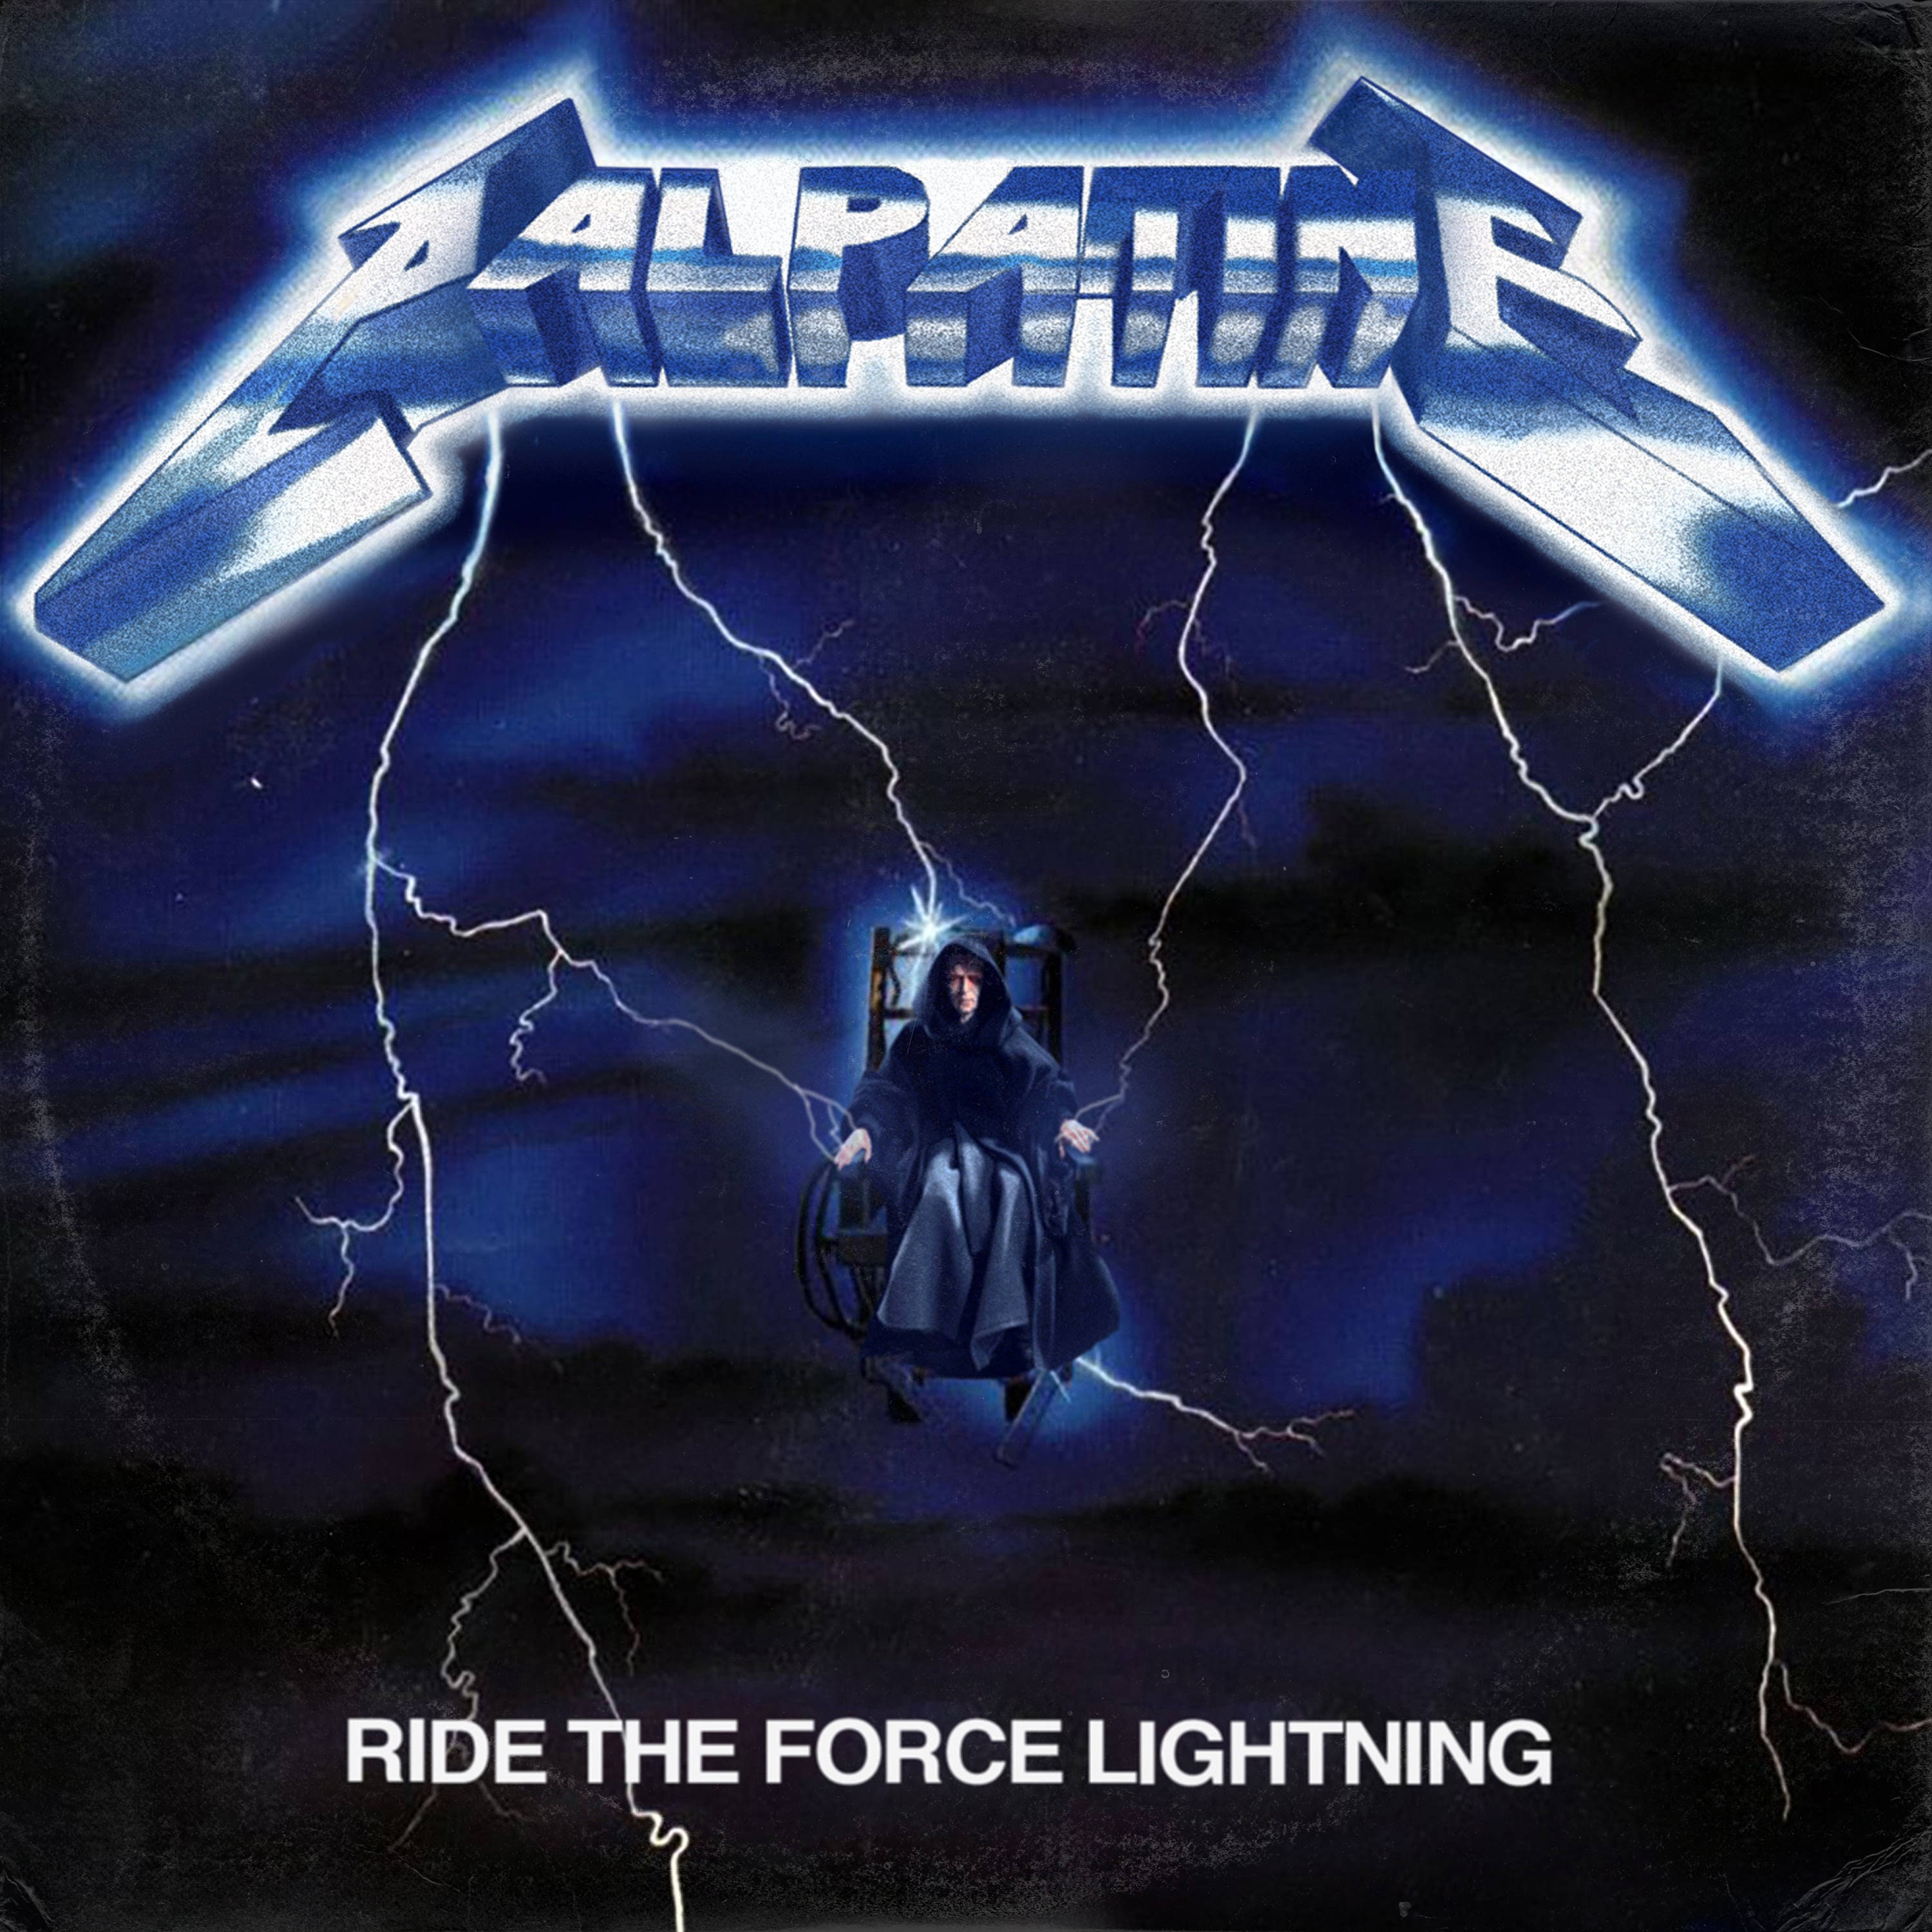 Ride the Force Lightning from teeVillain